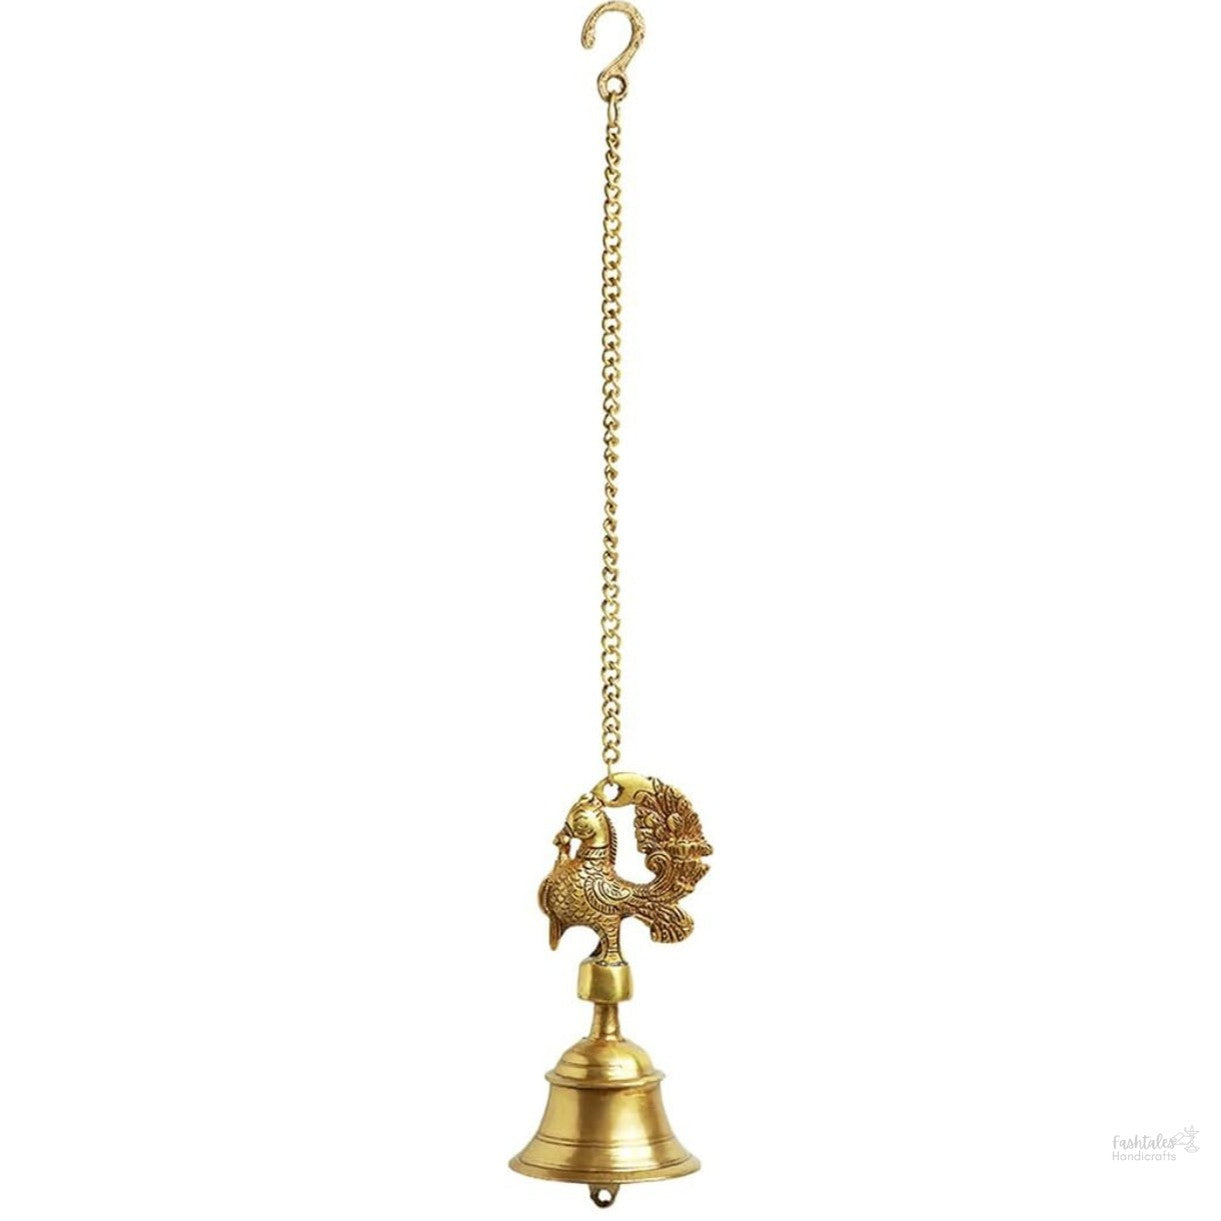 Fashtales Handicrafts 'Peacock' Brass Decorative Hanging Bells for Home Decoration (Set of 2, Pure Brass, 3.7X 3.7 x 7.7 Inch, 2.2 Kg) |Brass Bell Hanging Decorative Items Bell for Mandir Bell for Pooja Room